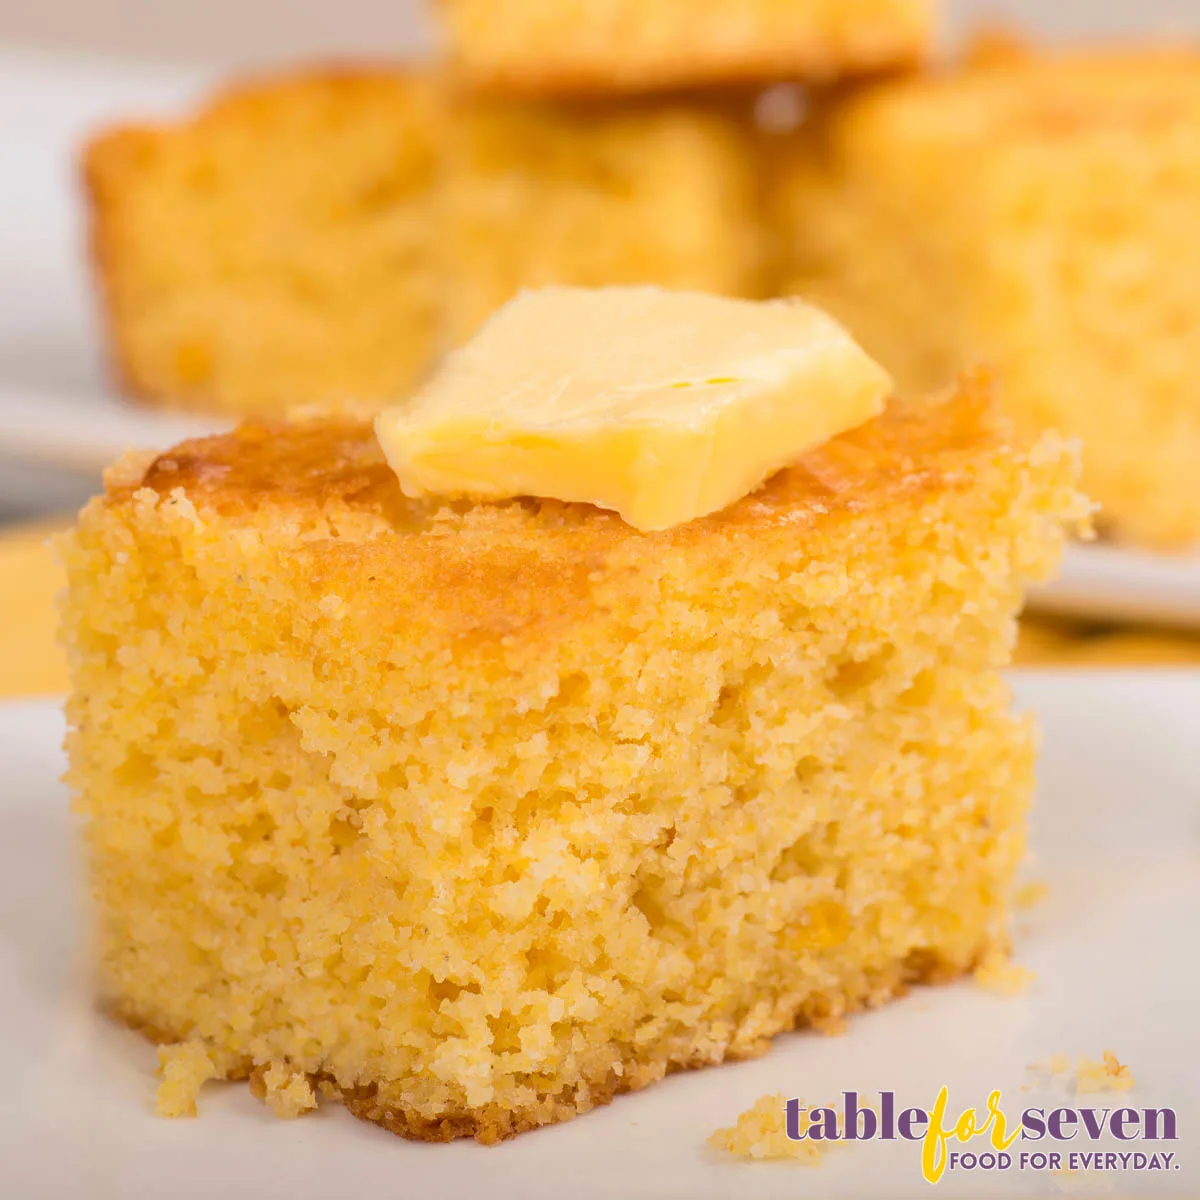 Cornbread served with butter